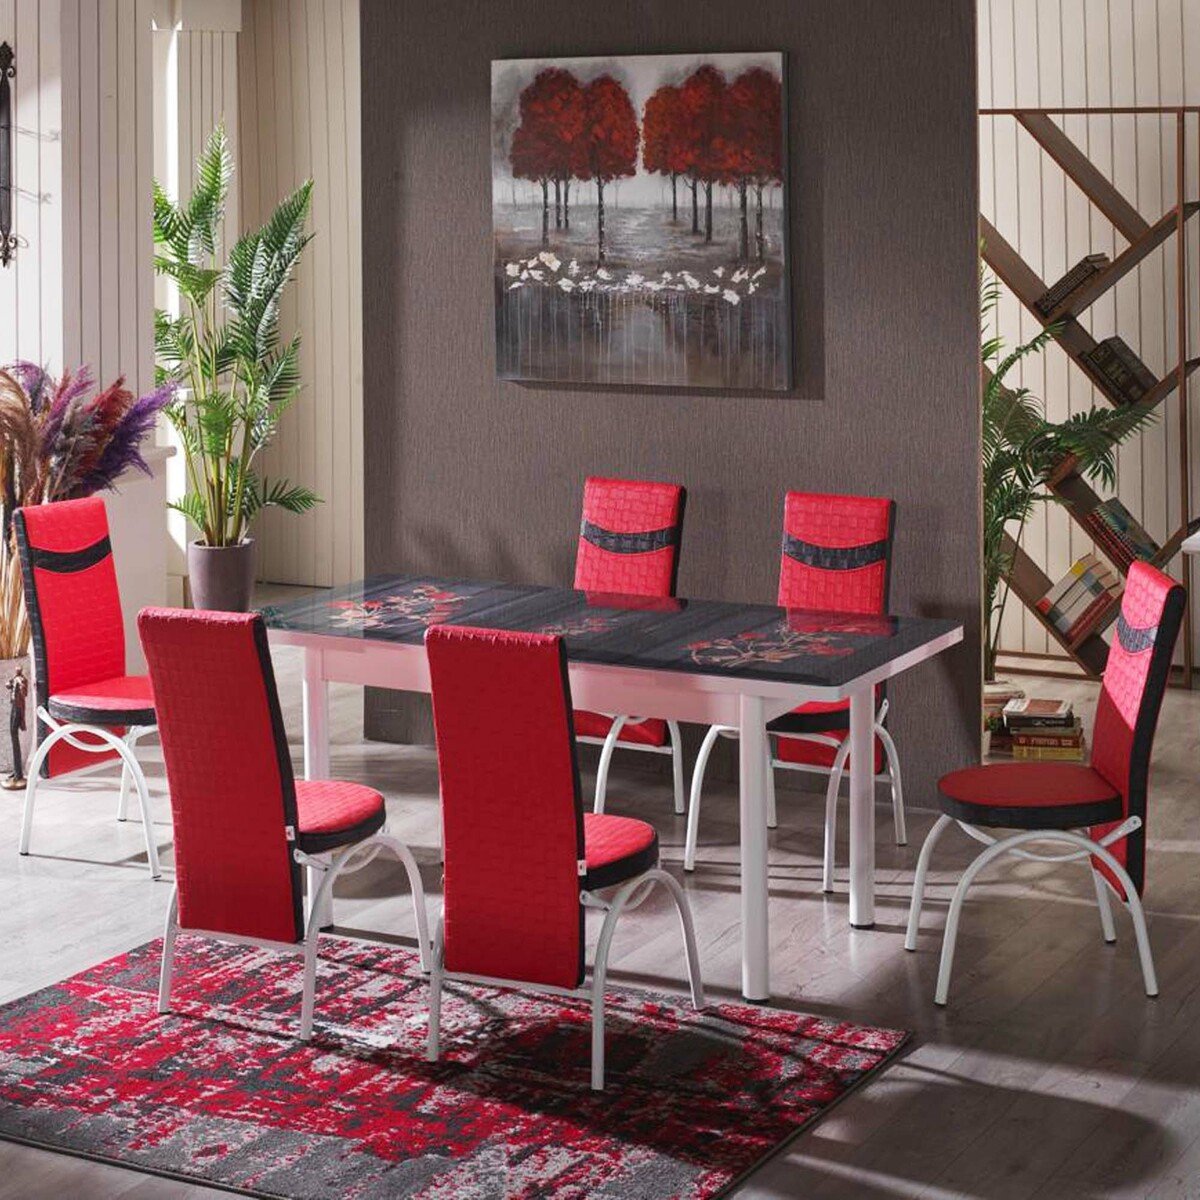 Maple Leaf Glass Dining Table + 6 Chairs 1218 Assorted